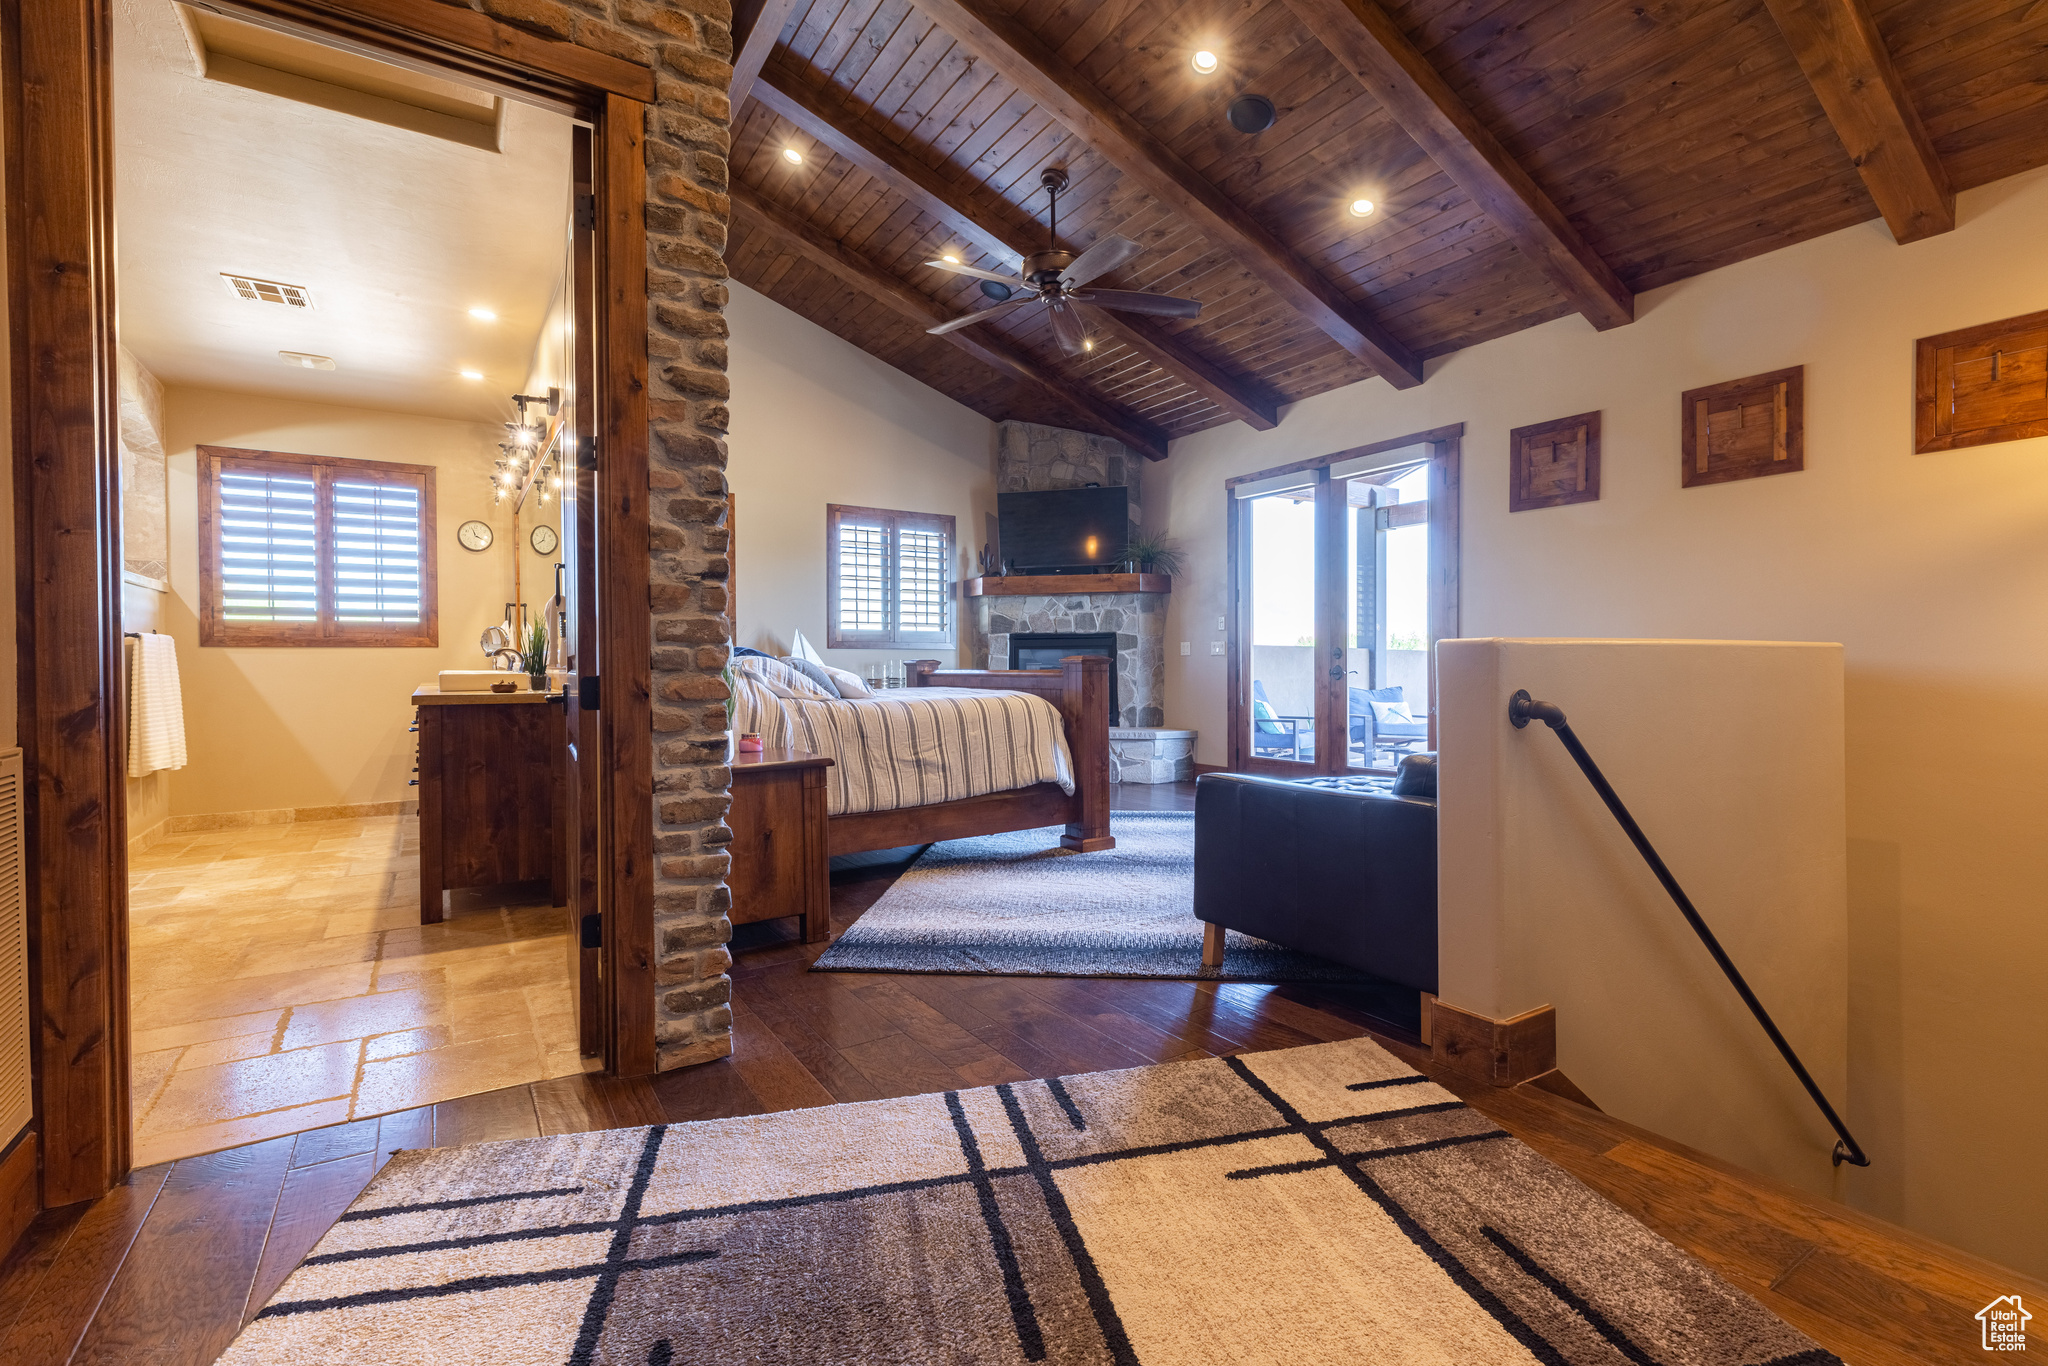 Principle bedroom suite with high vaulted ceiling, wooden ceiling, beam ceiling, and a stone fireplace